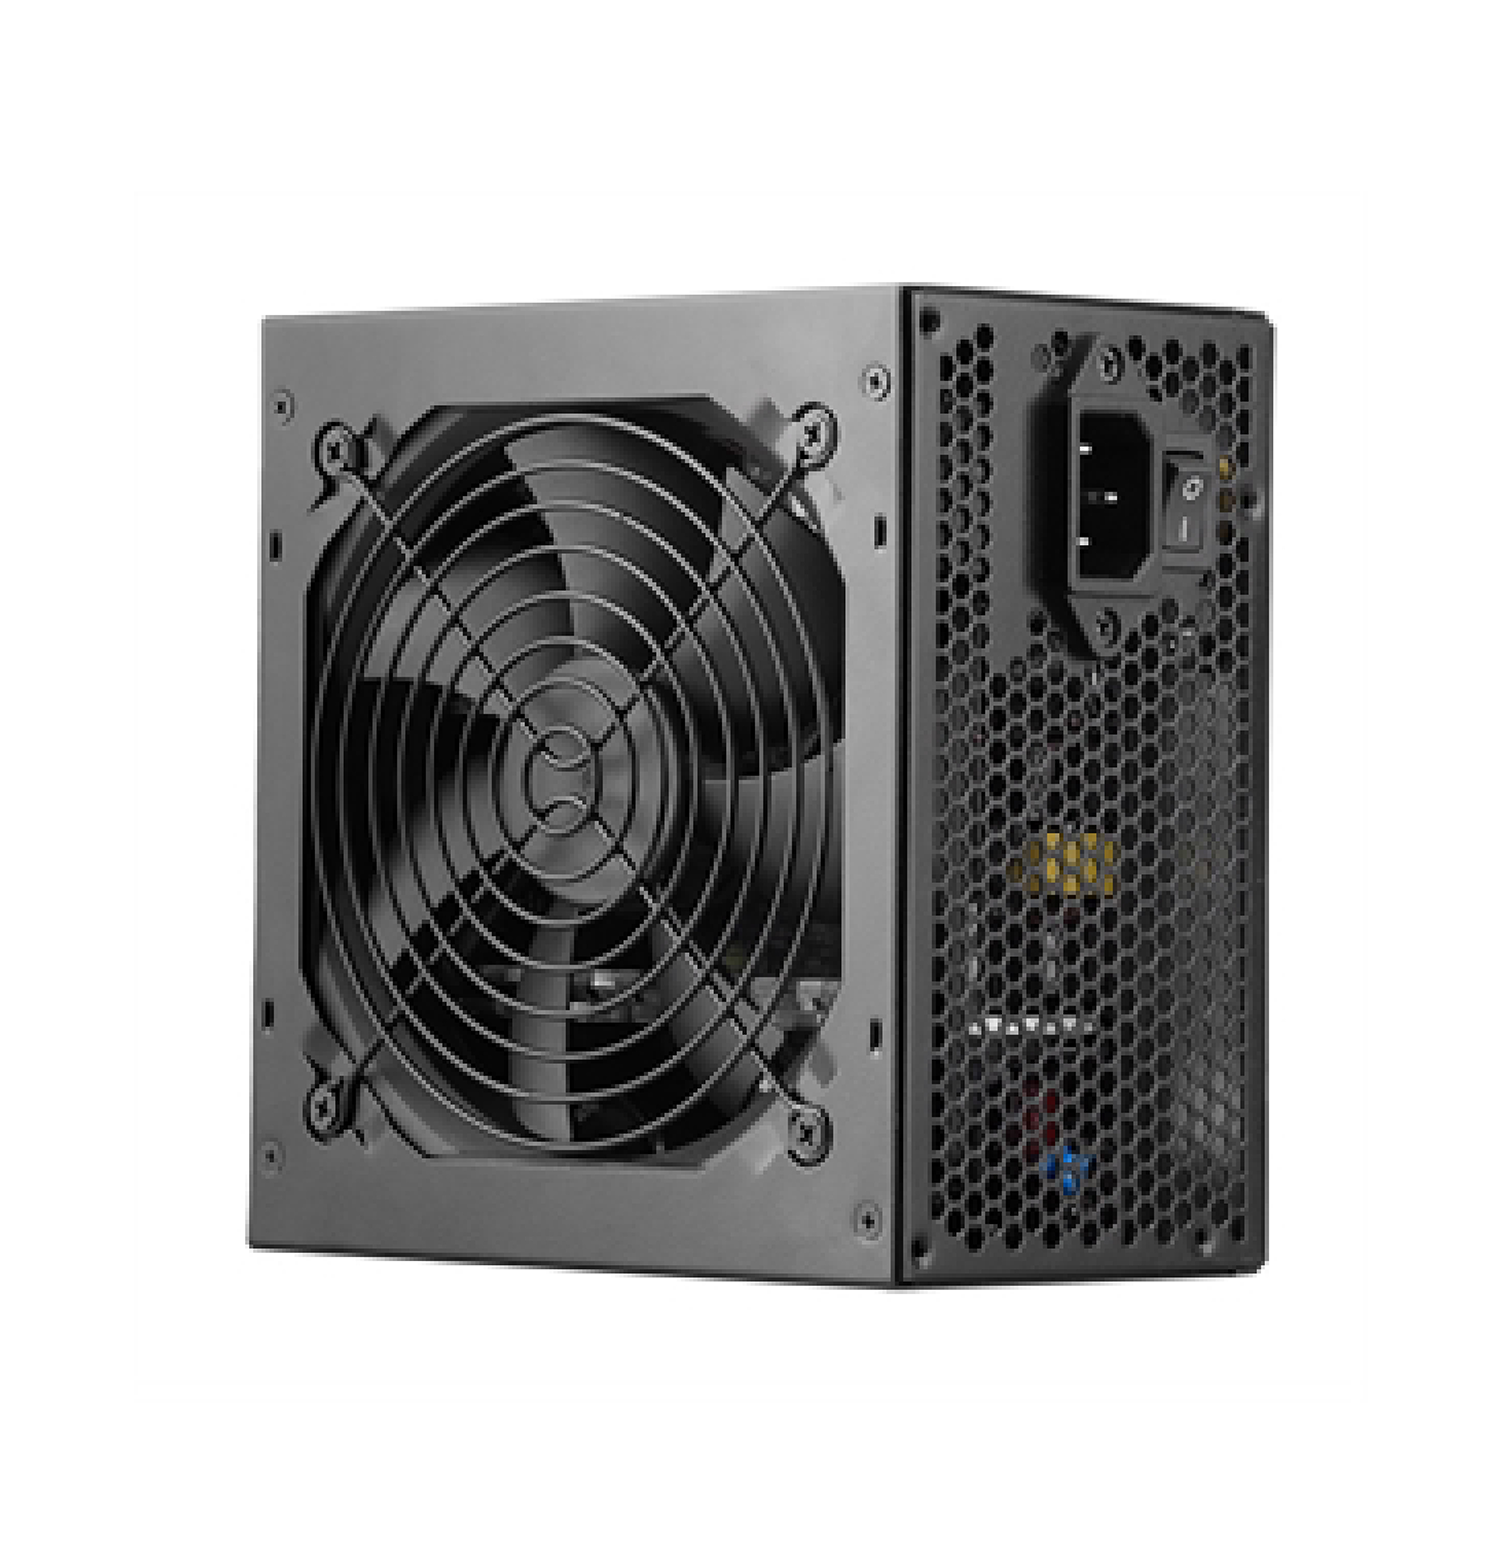 SEGOTEP AN650W POWER SUPPLY